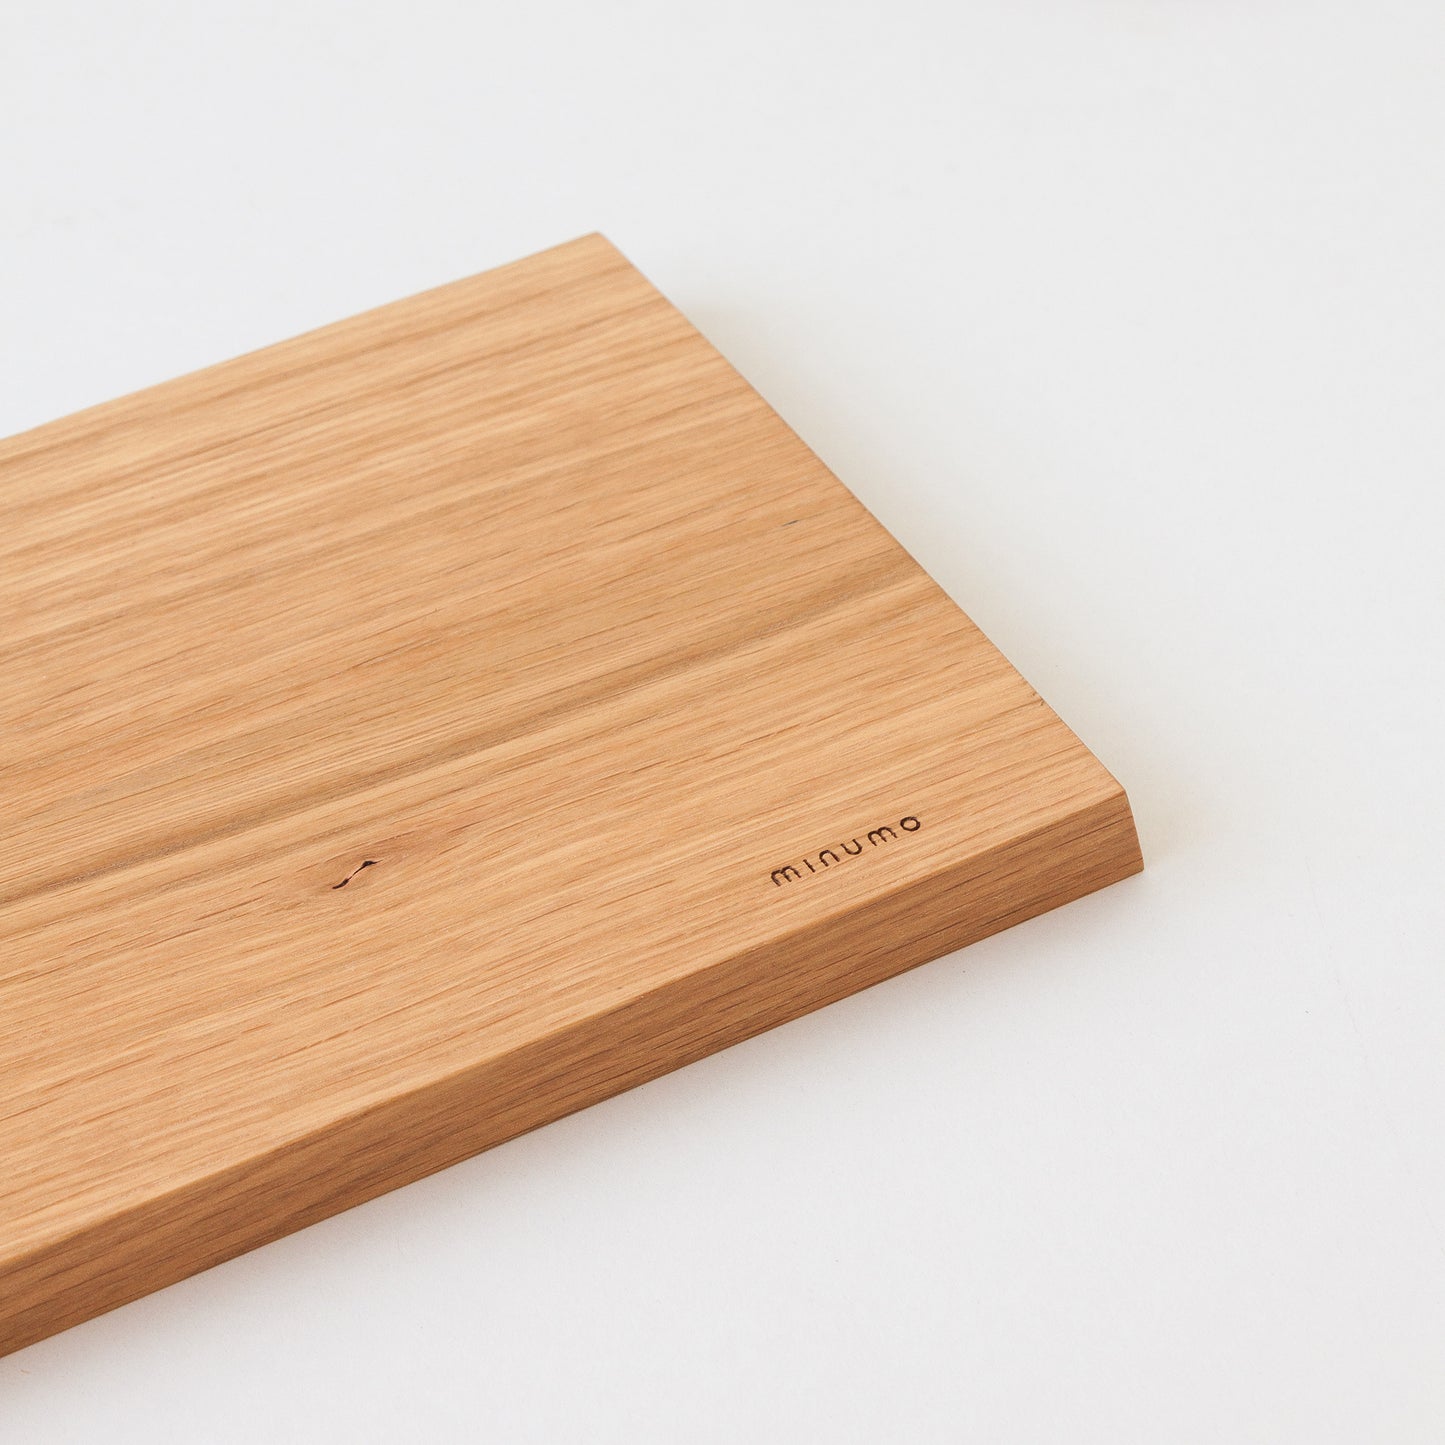 Minumo large minimal wooden cutting and serving board fold from oak with logo